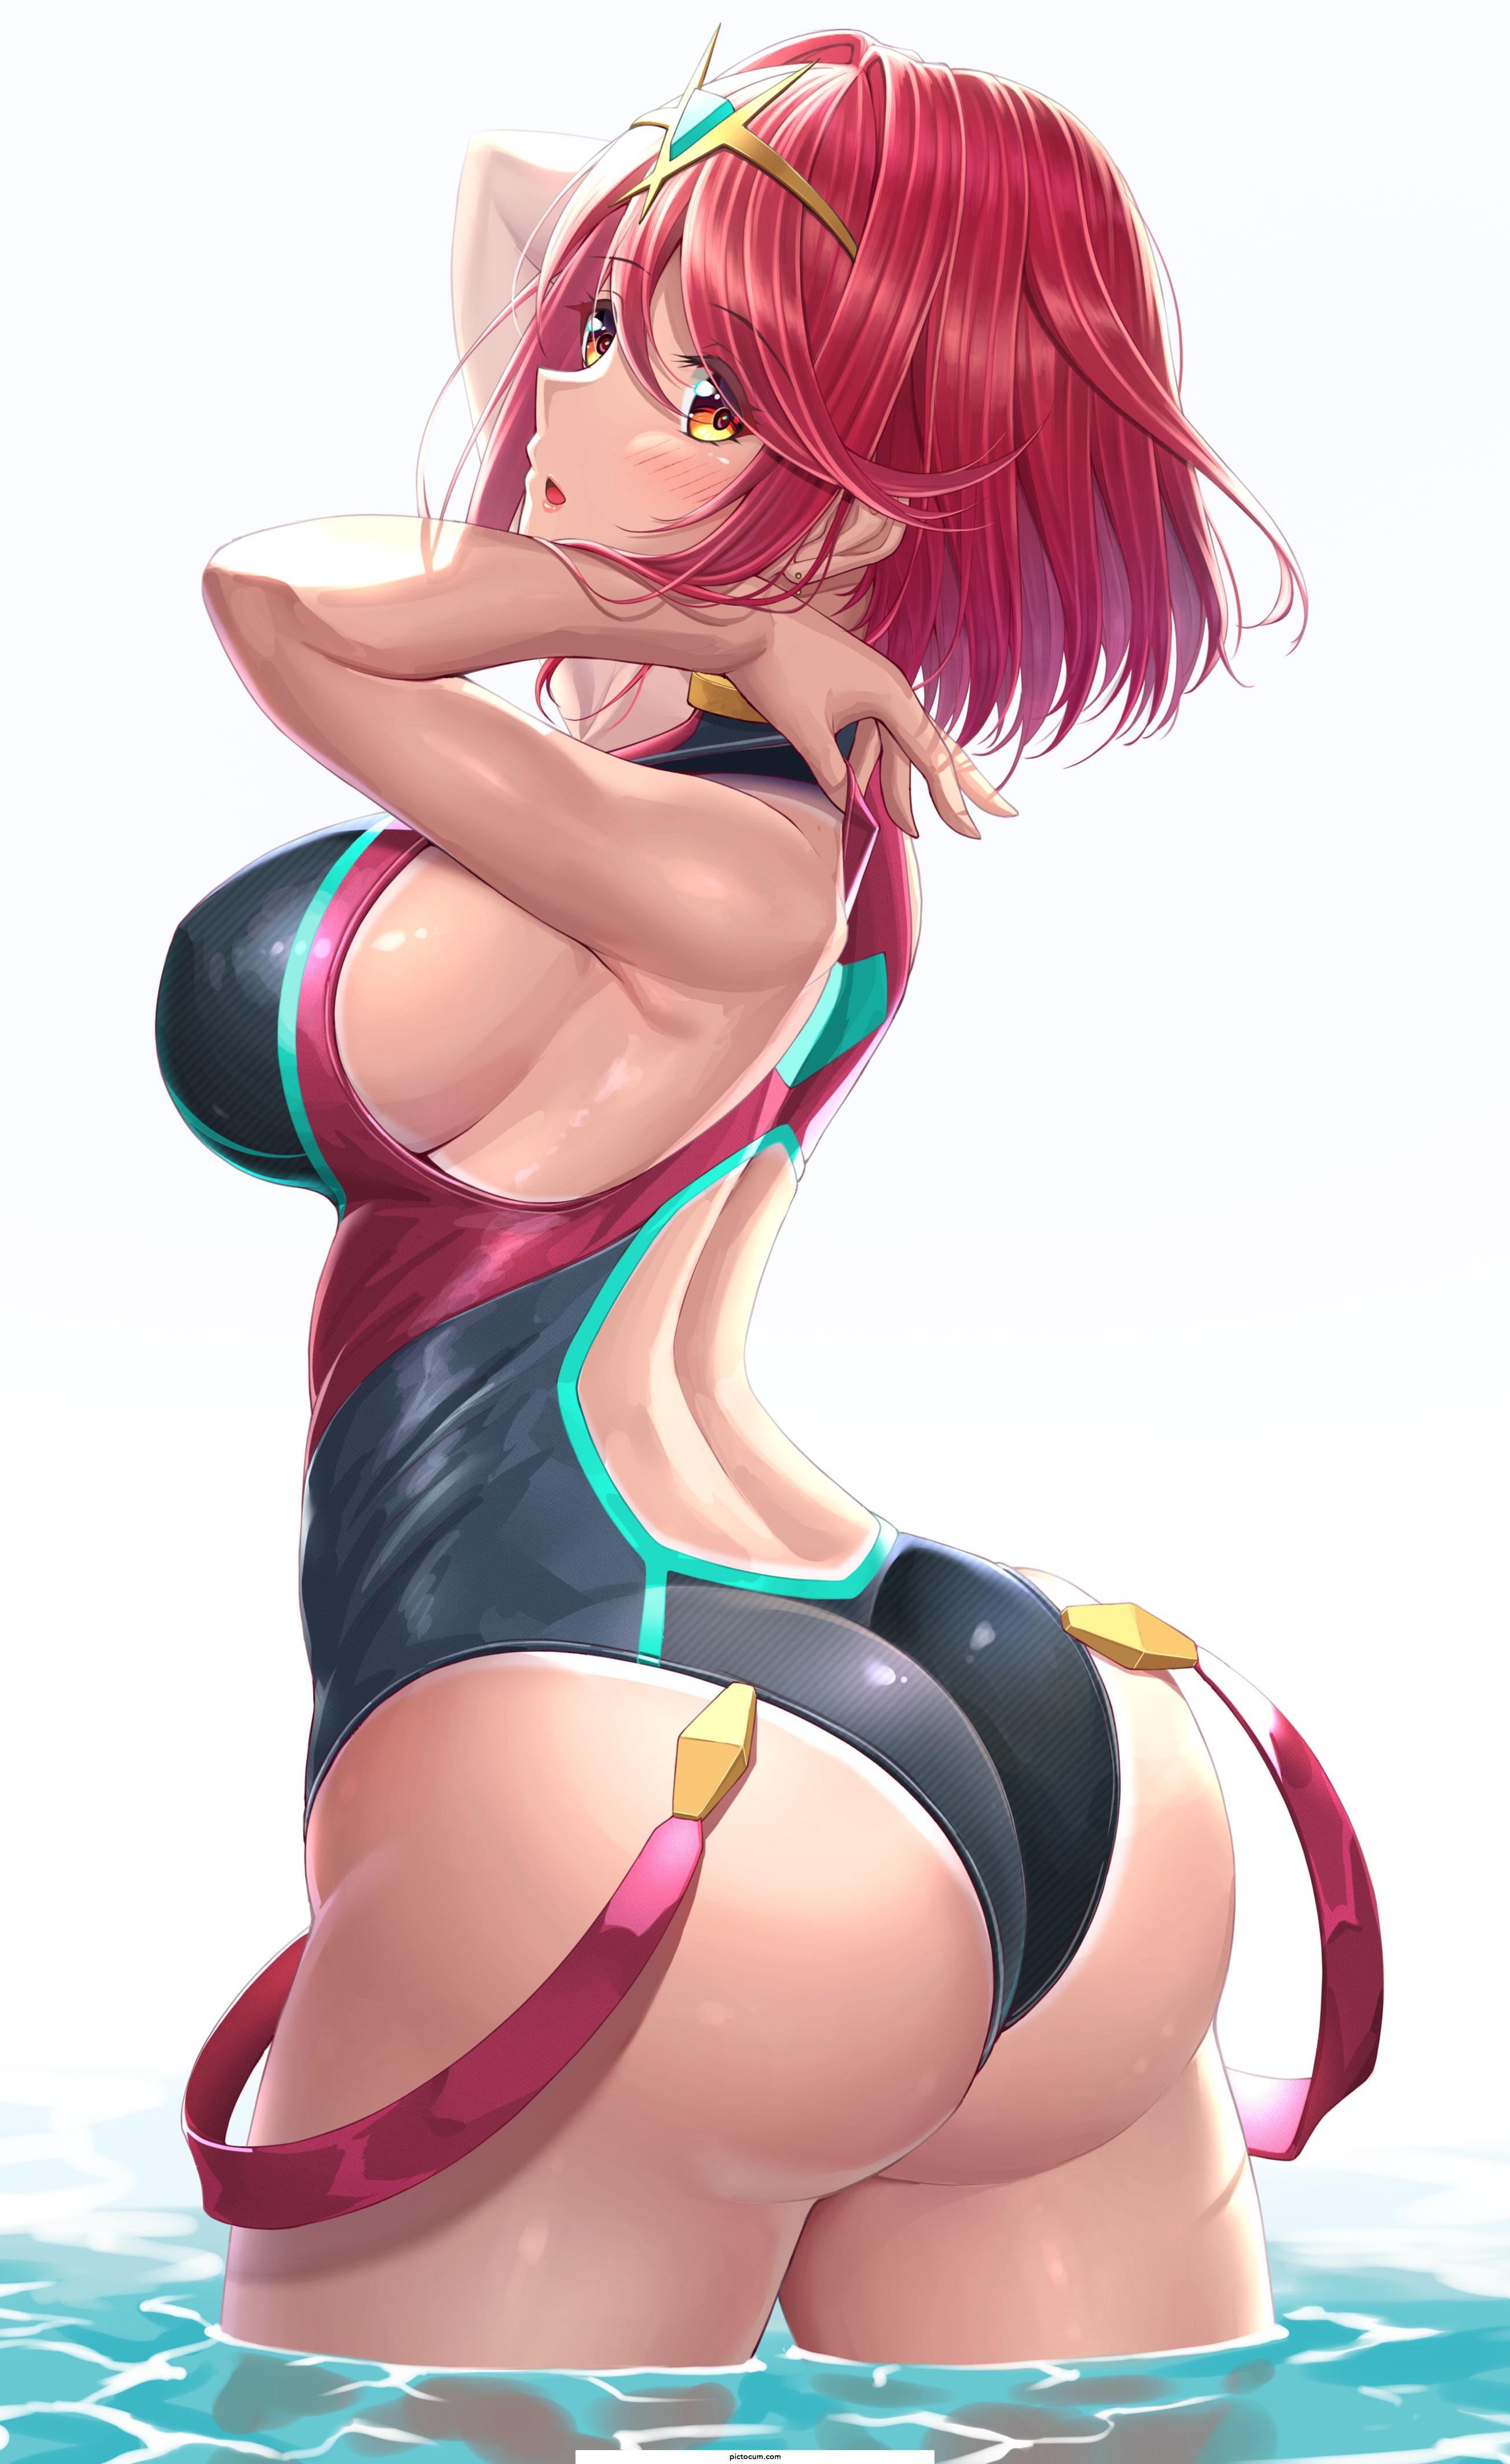 Pyra's got curves for days